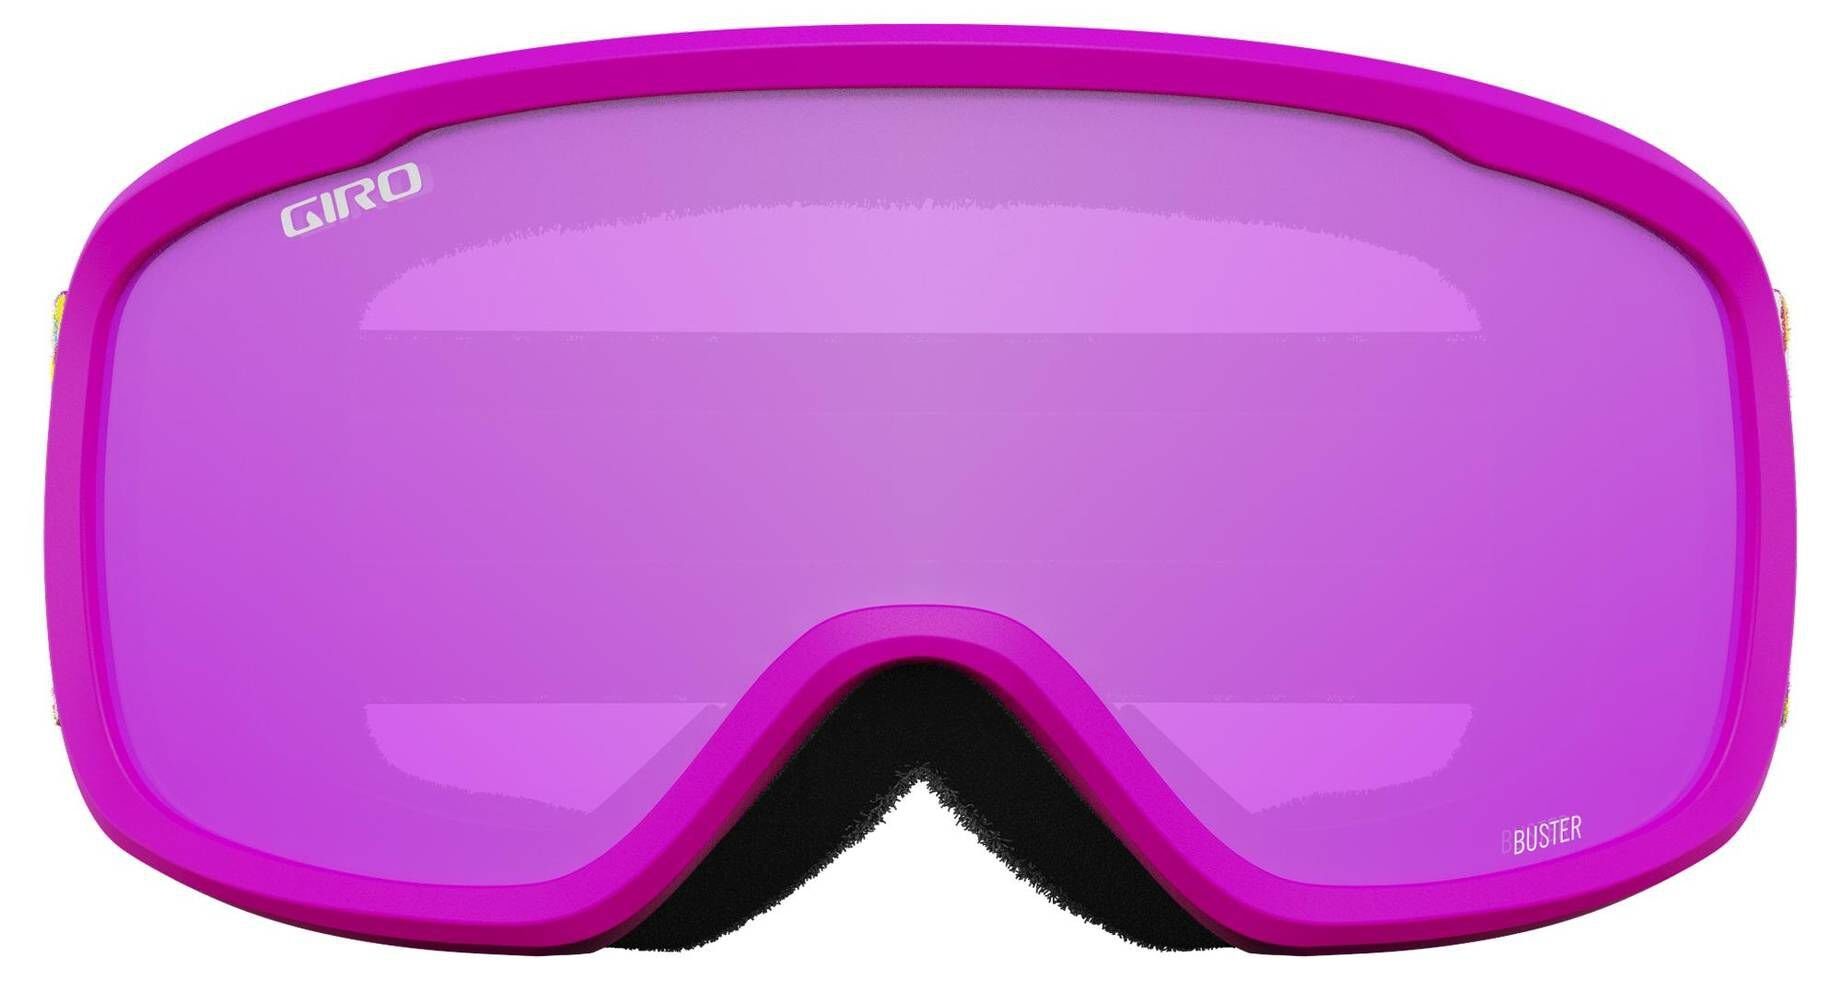 Giro Skibrille Skibrille SNOW wollweiss BUSTER (101) GOGGLE Kinder